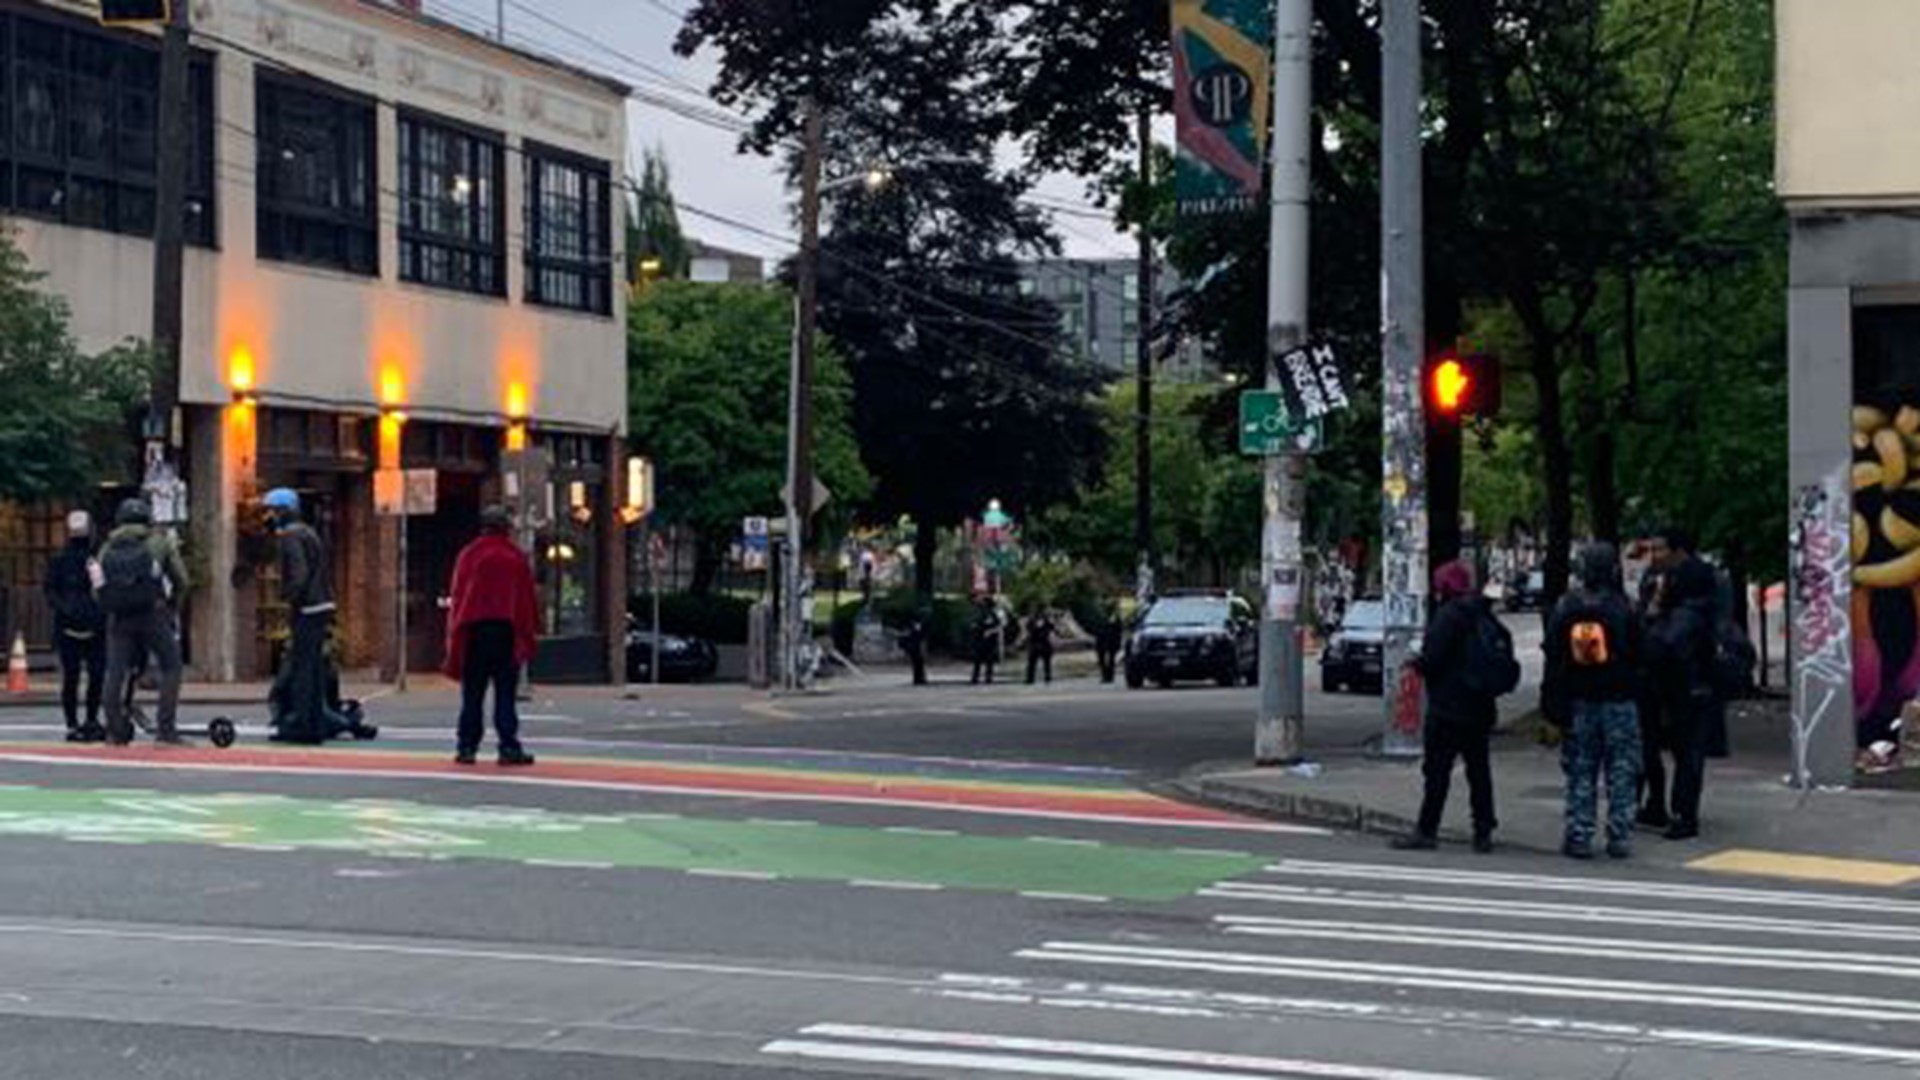 Seattle police said 10 people were arrested between 10 p.m. Thursday and into Friday morning for property destruction, assault, harassment, and failure to disperse.